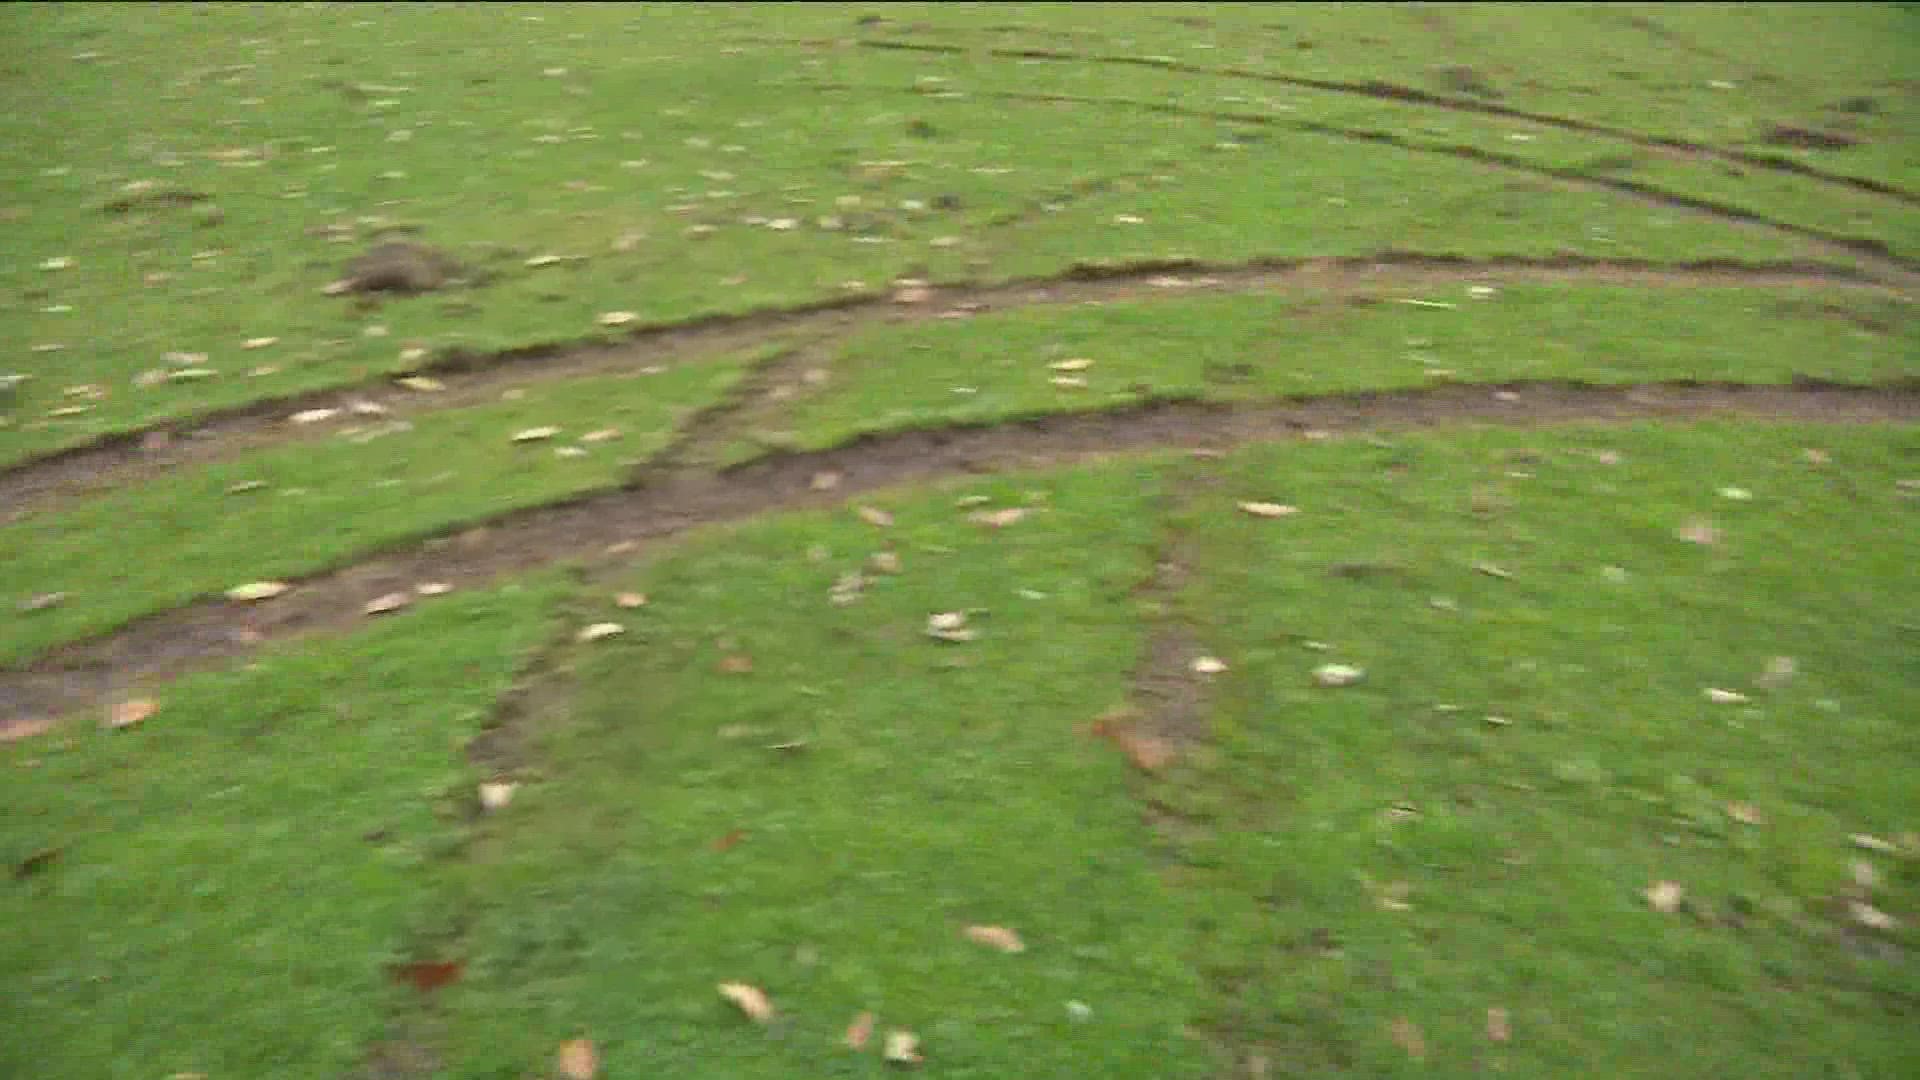 Tire marks where left behind by someone who drove their car onto the field, tearing up the grass.